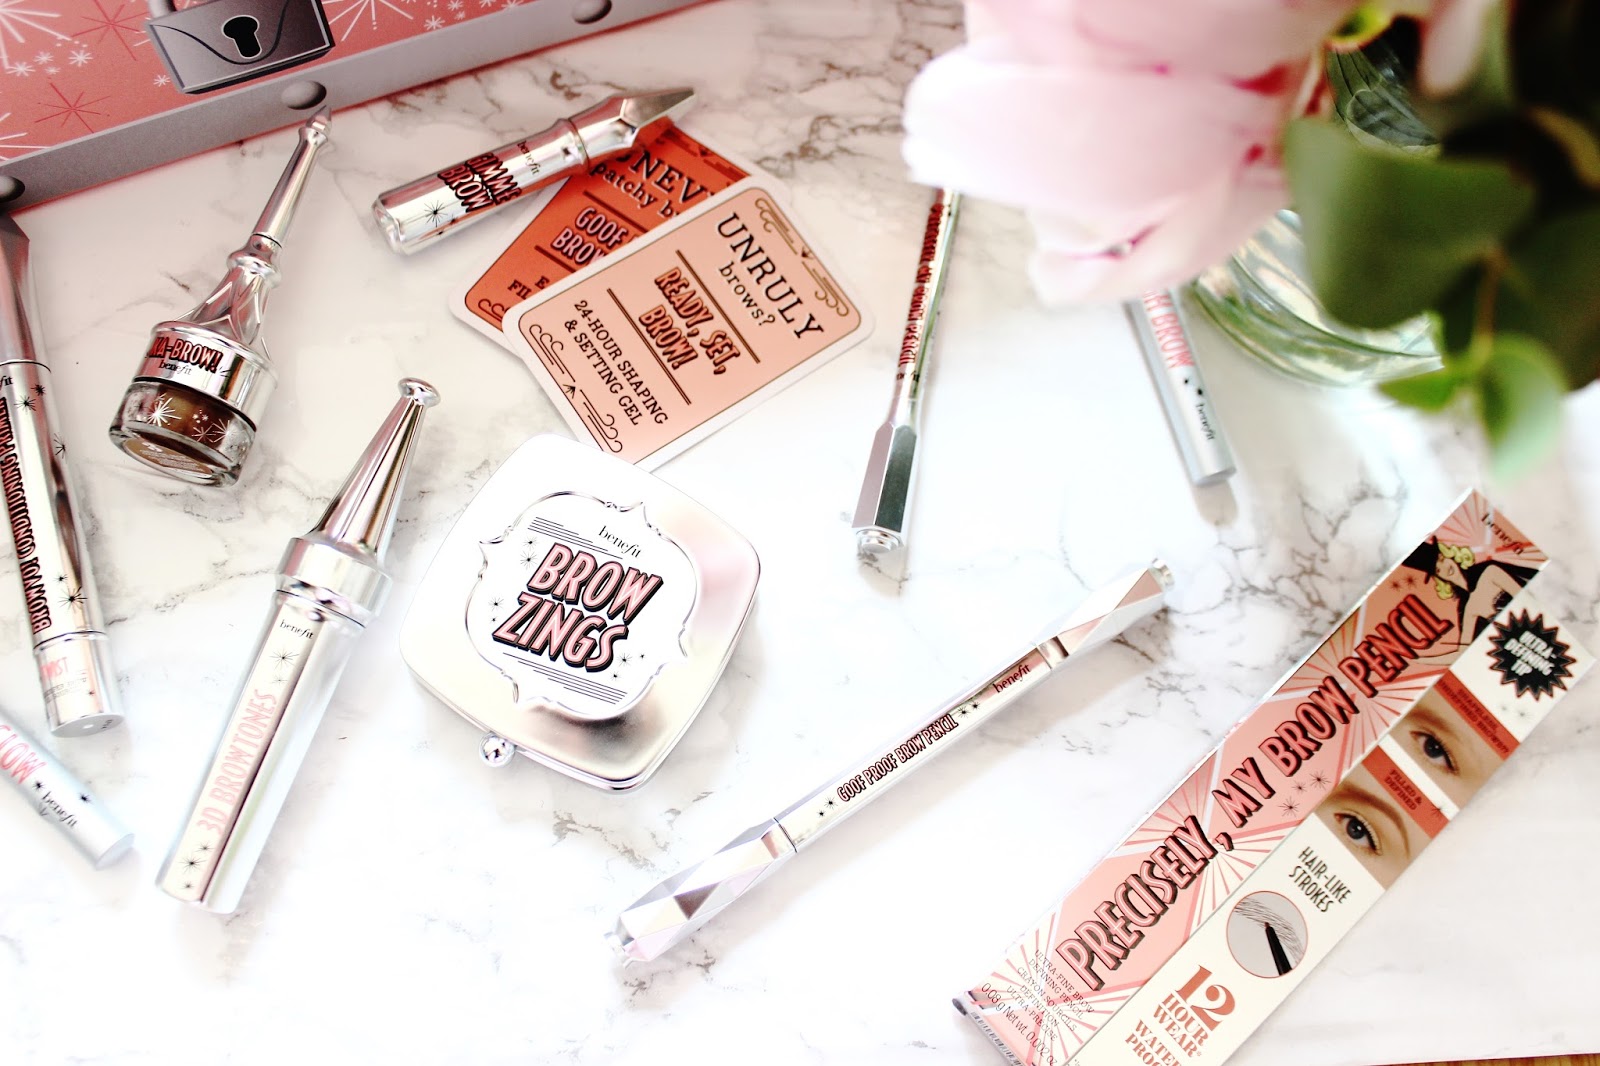 Benefit Brow Products